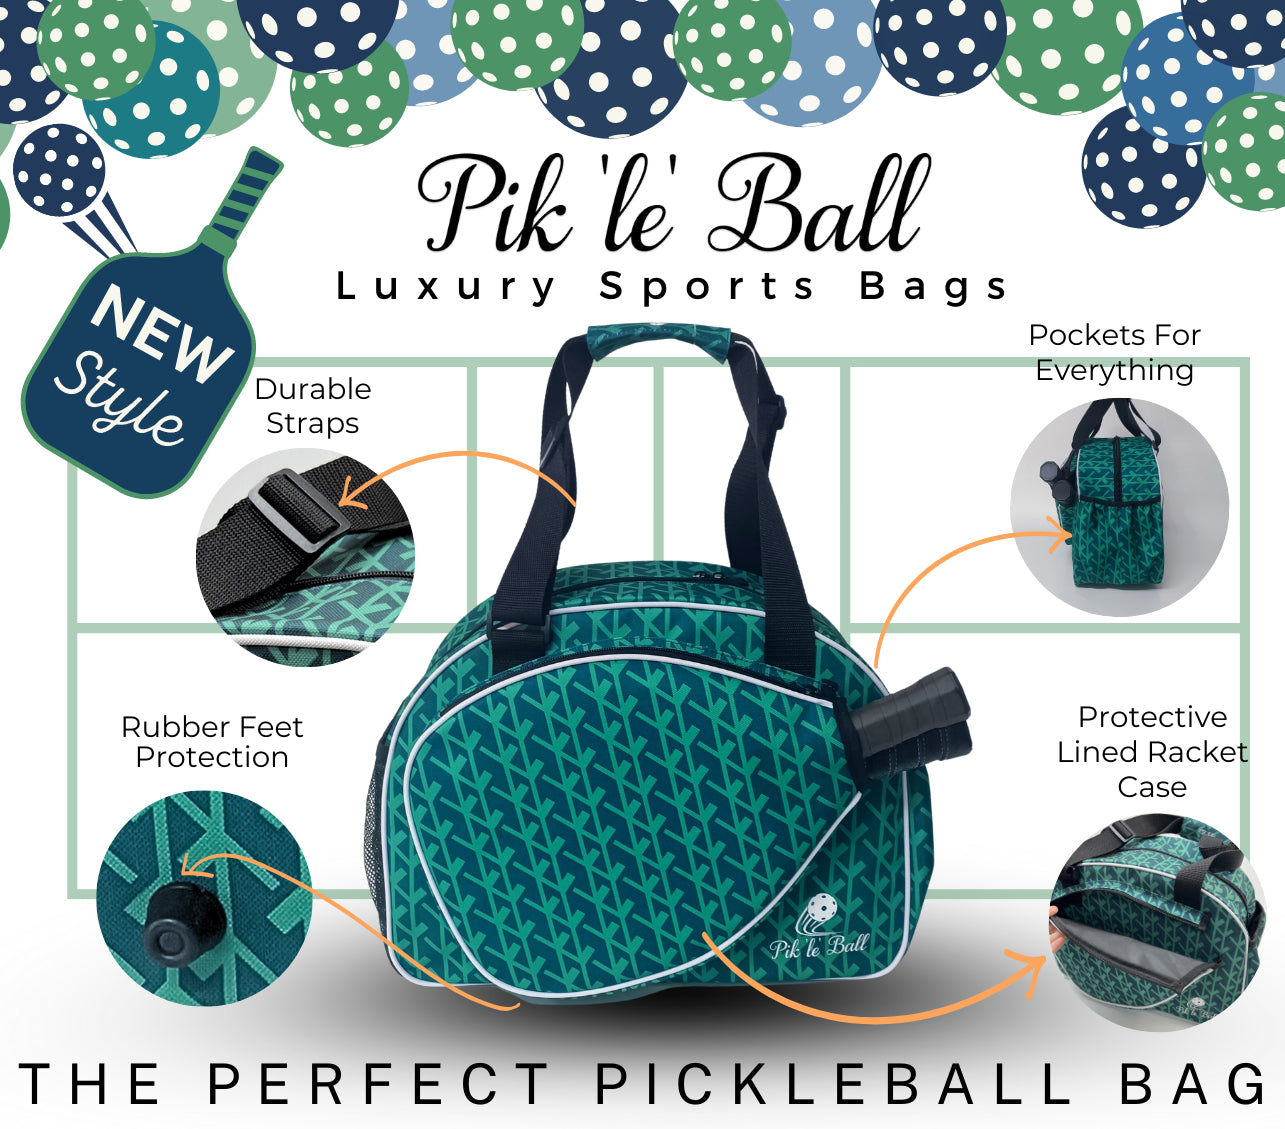 Fancy green ladies pickleball bag and sports tote best features include lined protective paddle case